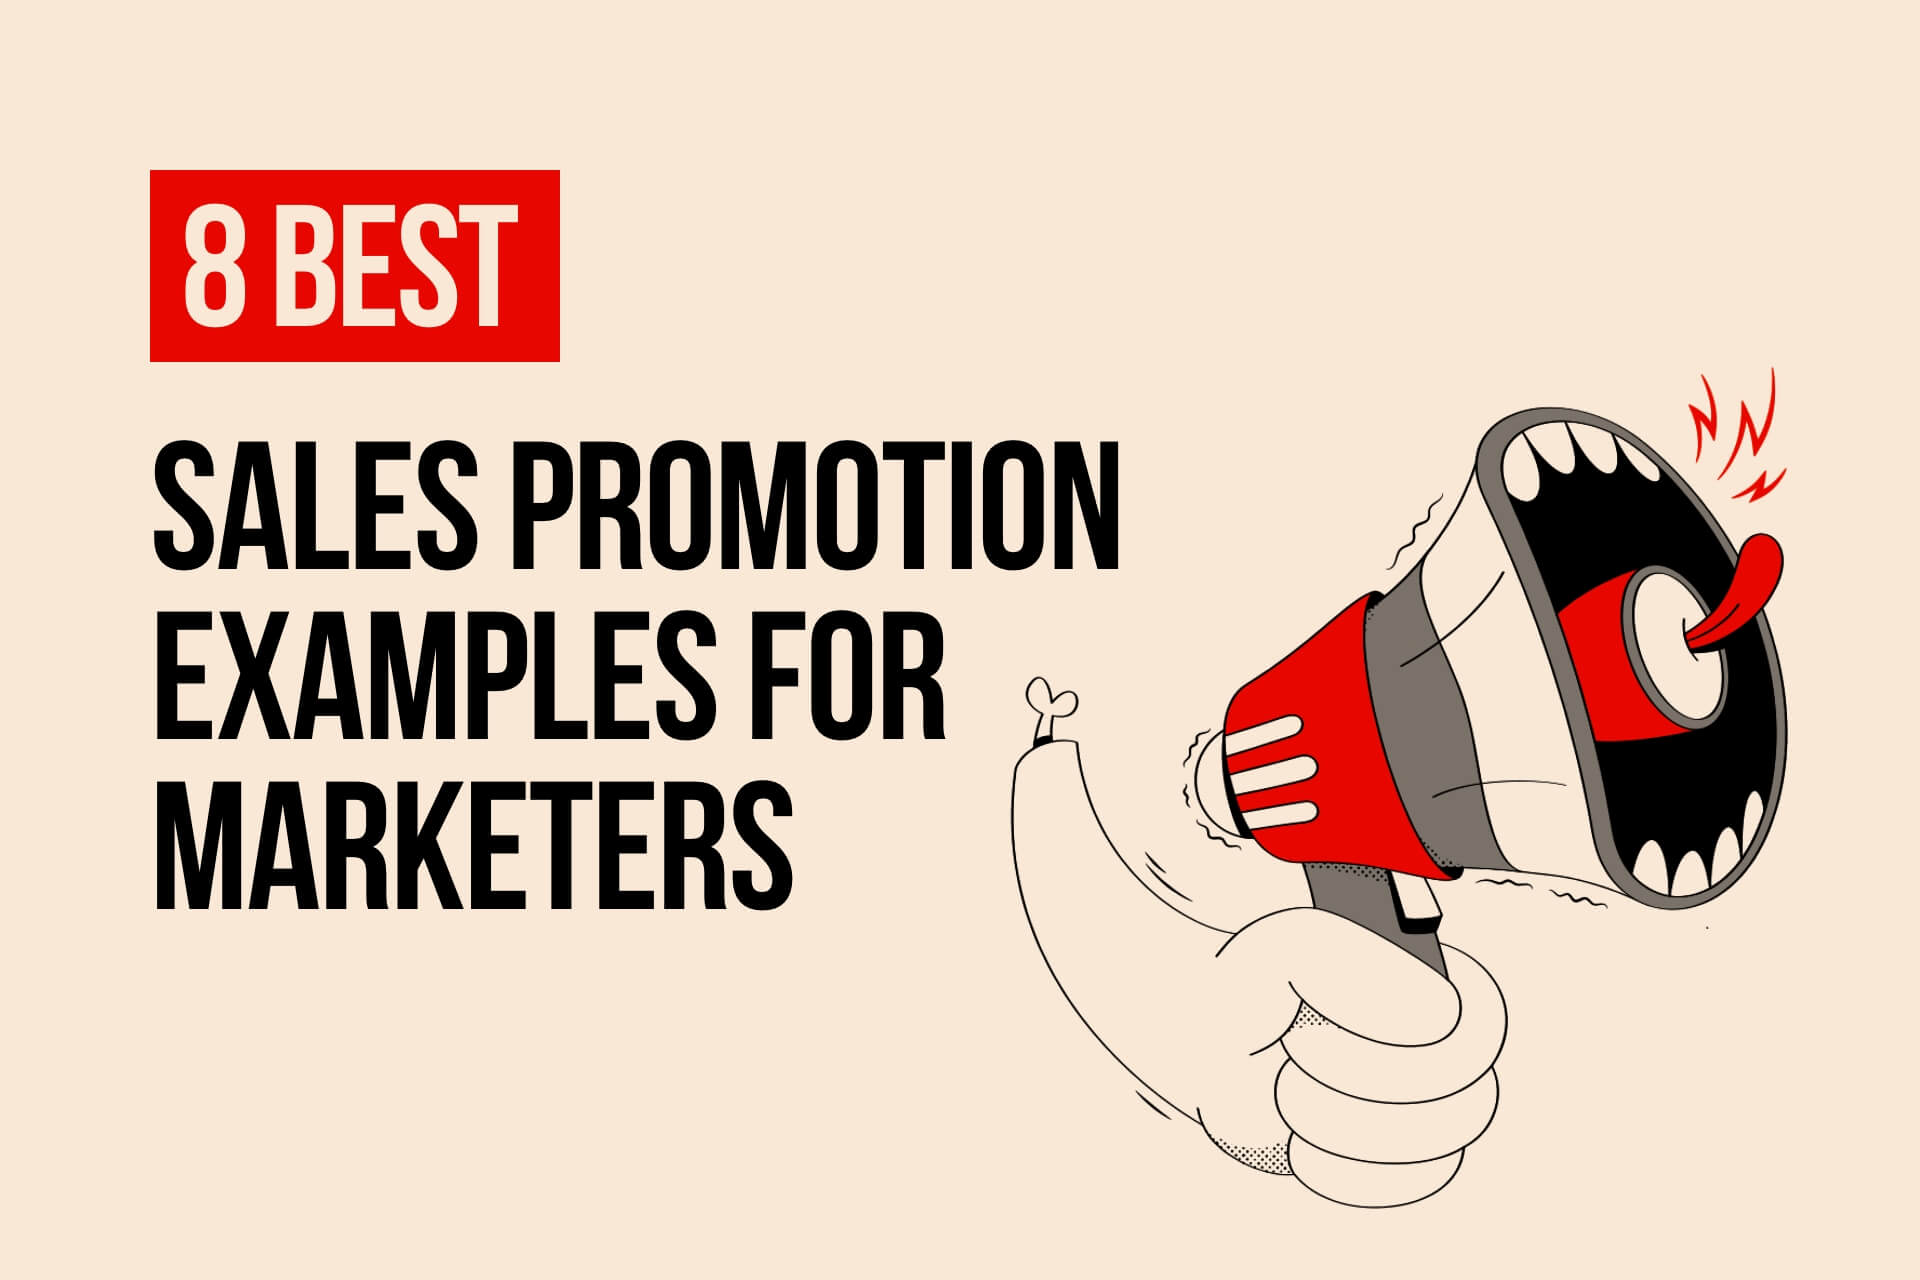 8 best sales promotion types for marketers